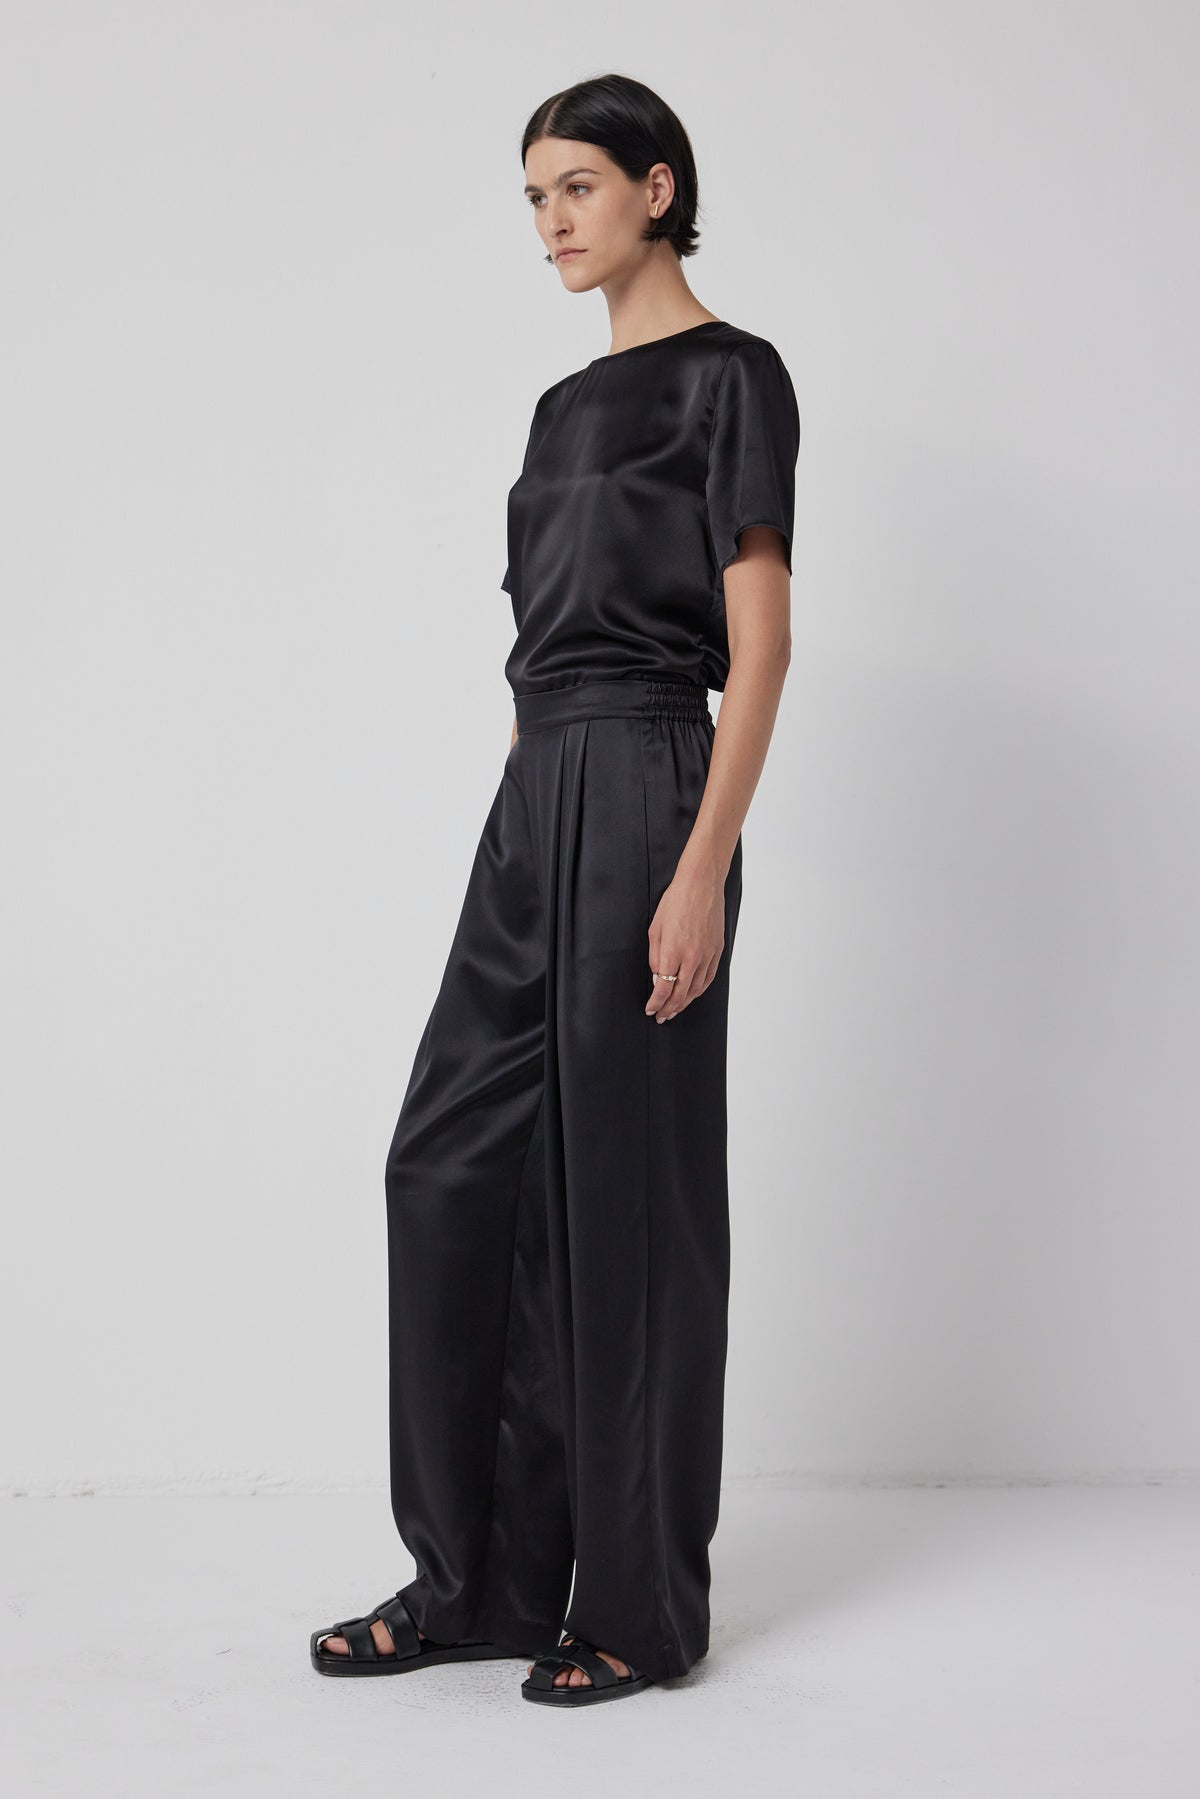   A woman stands in profile wearing a Velvet by Jenny Graham Pasadena Top and wide-leg trousers, paired with black sandals, against a plain background. 